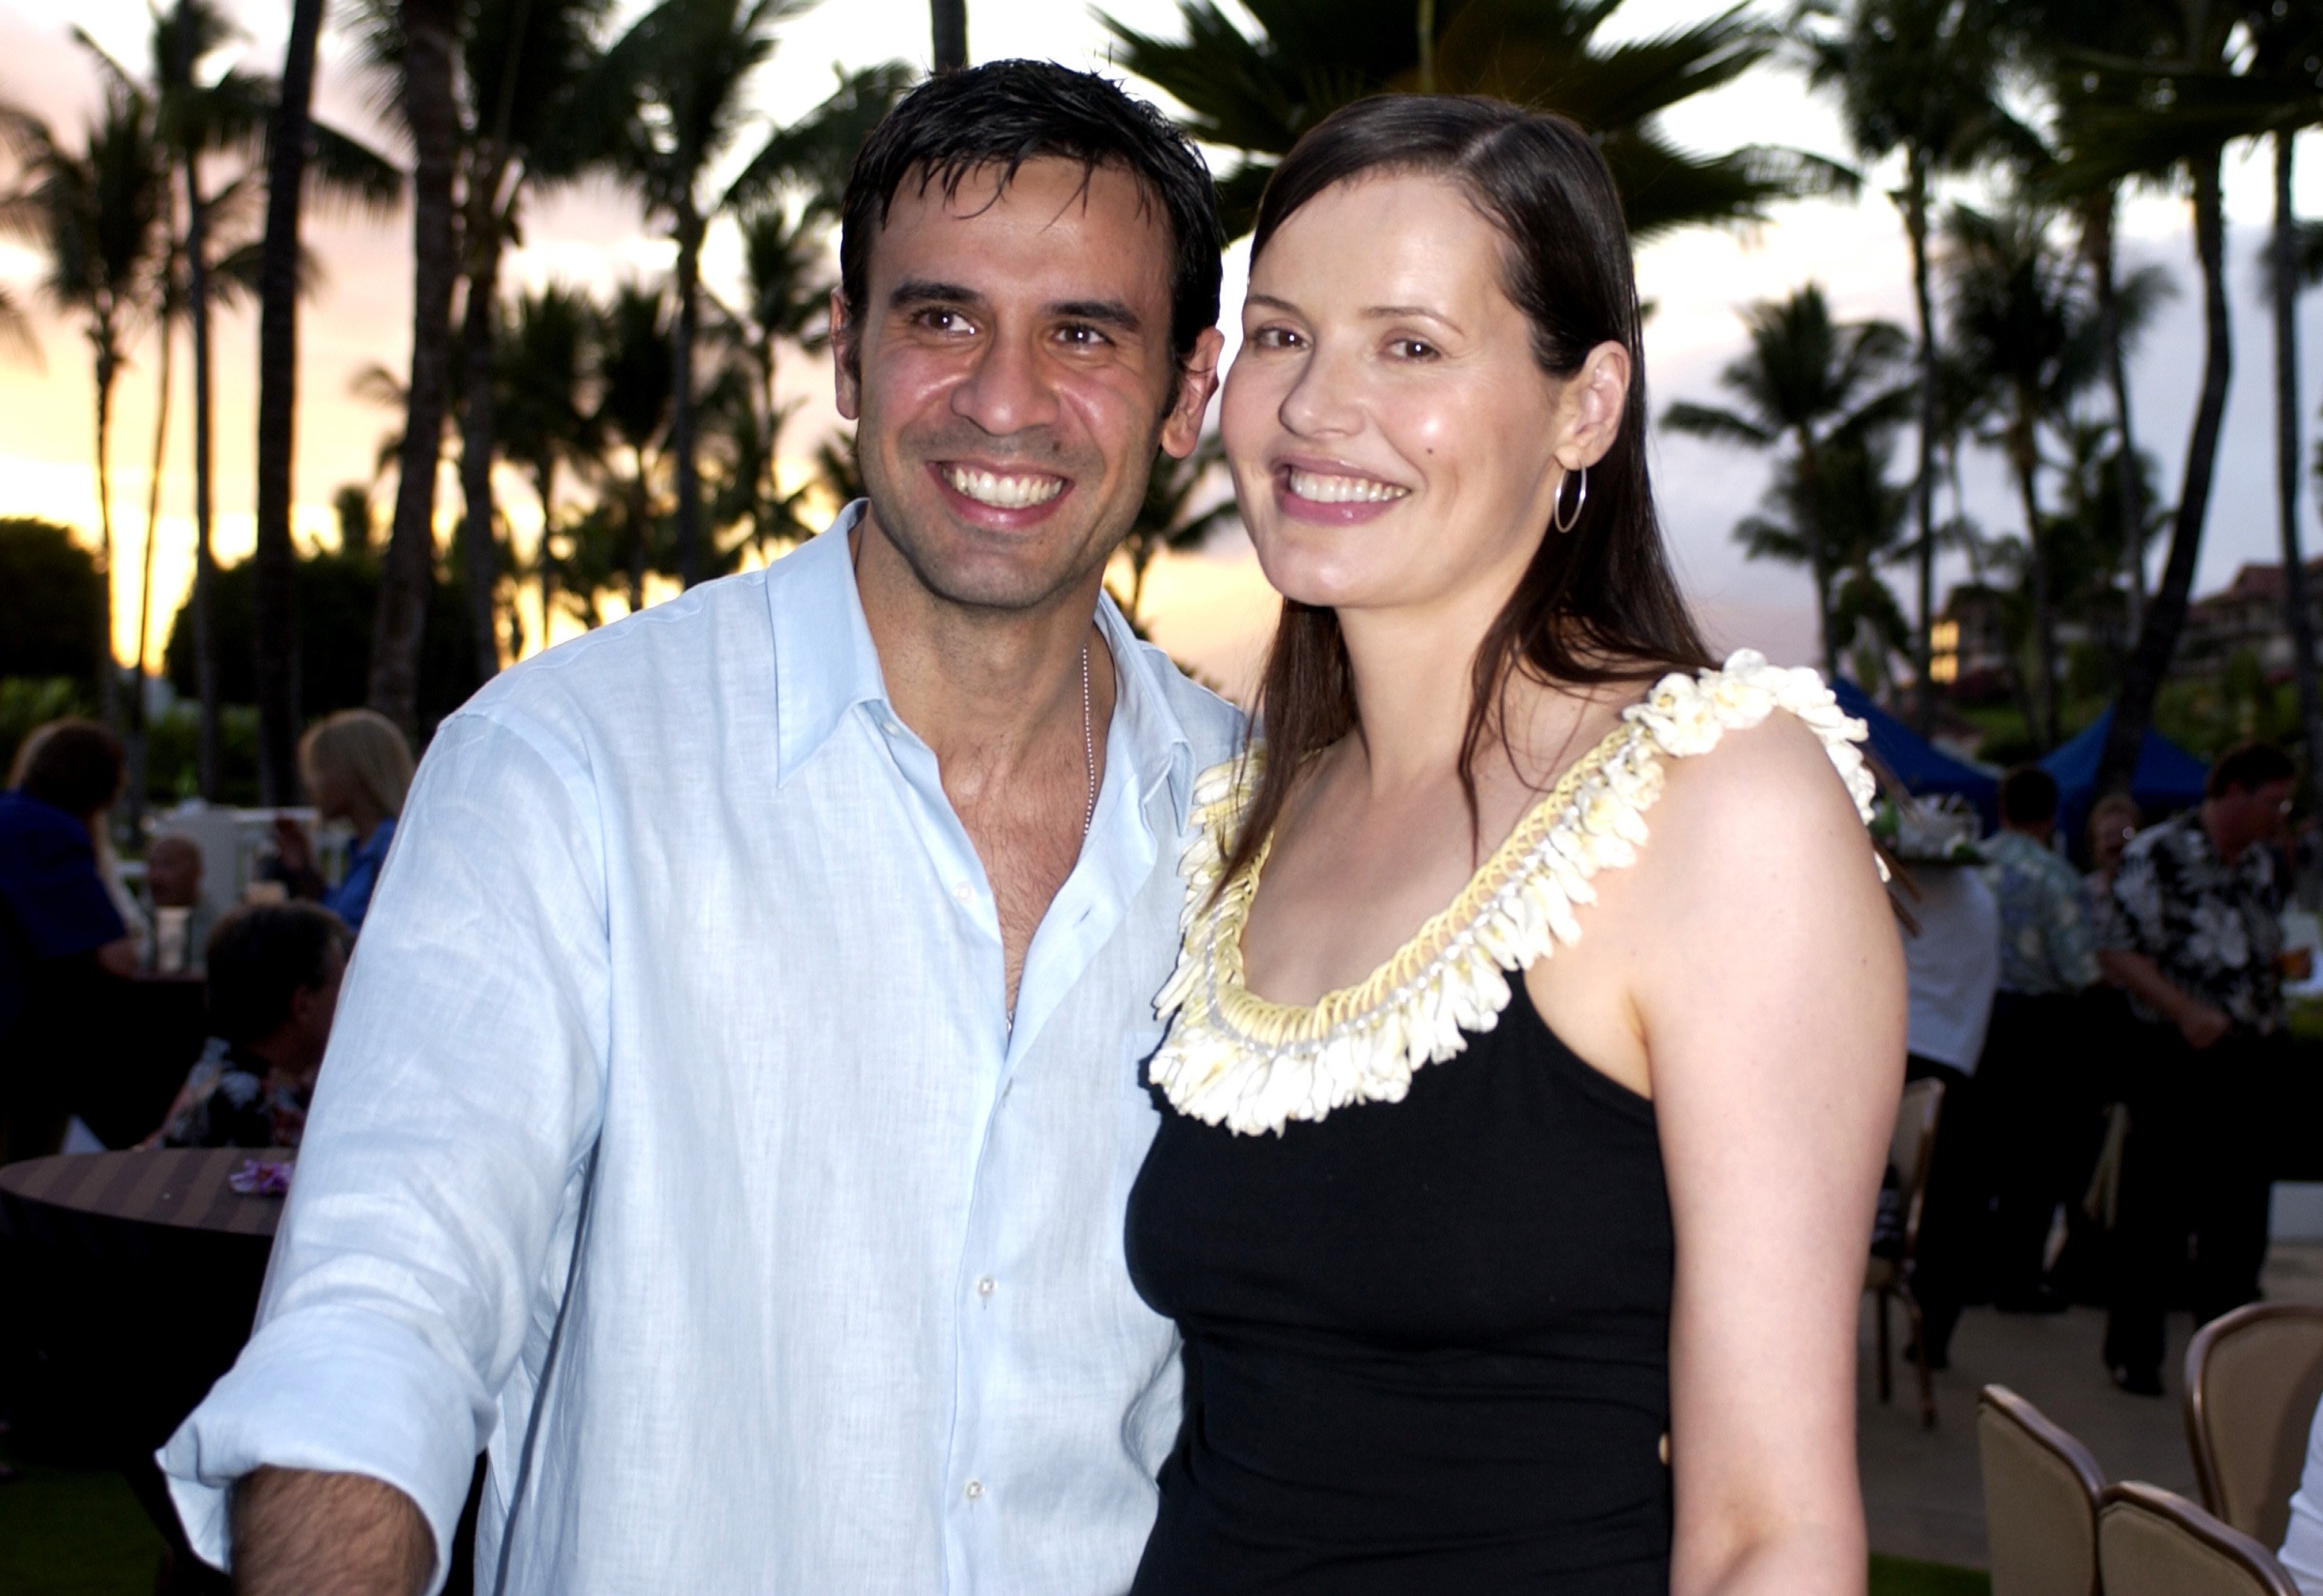 Geena Davis and Dr. Reza Jarrahy at the opening night of the 2003 Maui Film Festival | Source: Getty Images